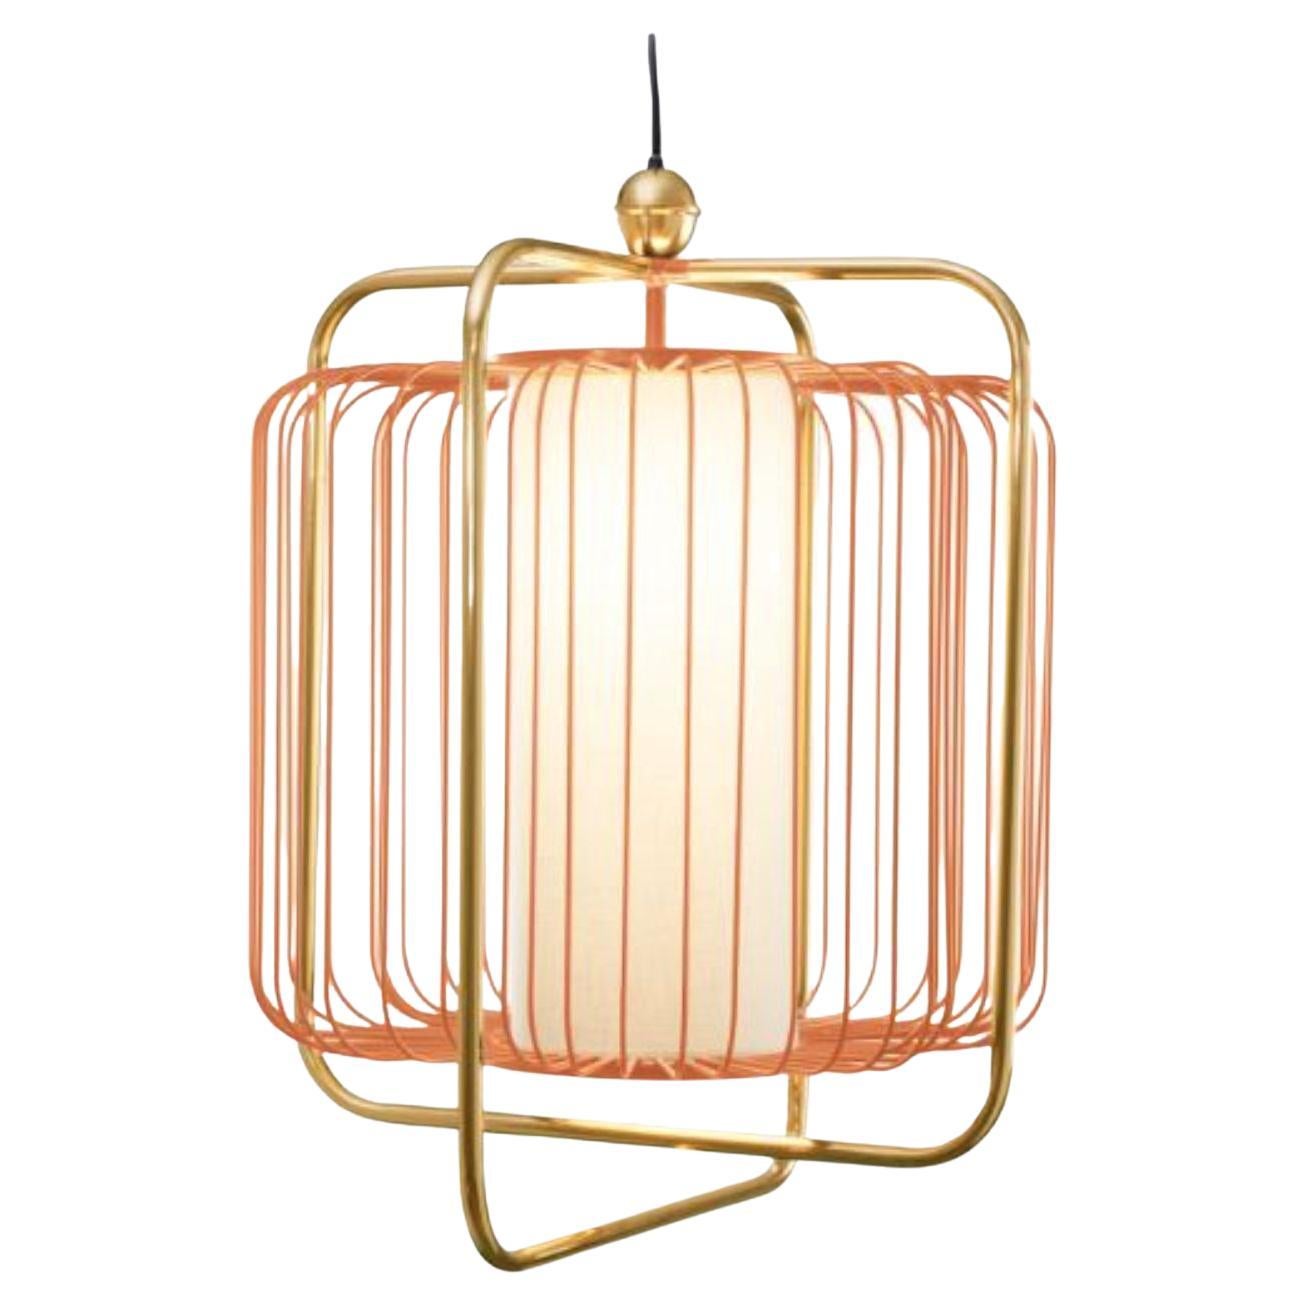 Brass and Salmon Jules Suspension Lamp by Dooq